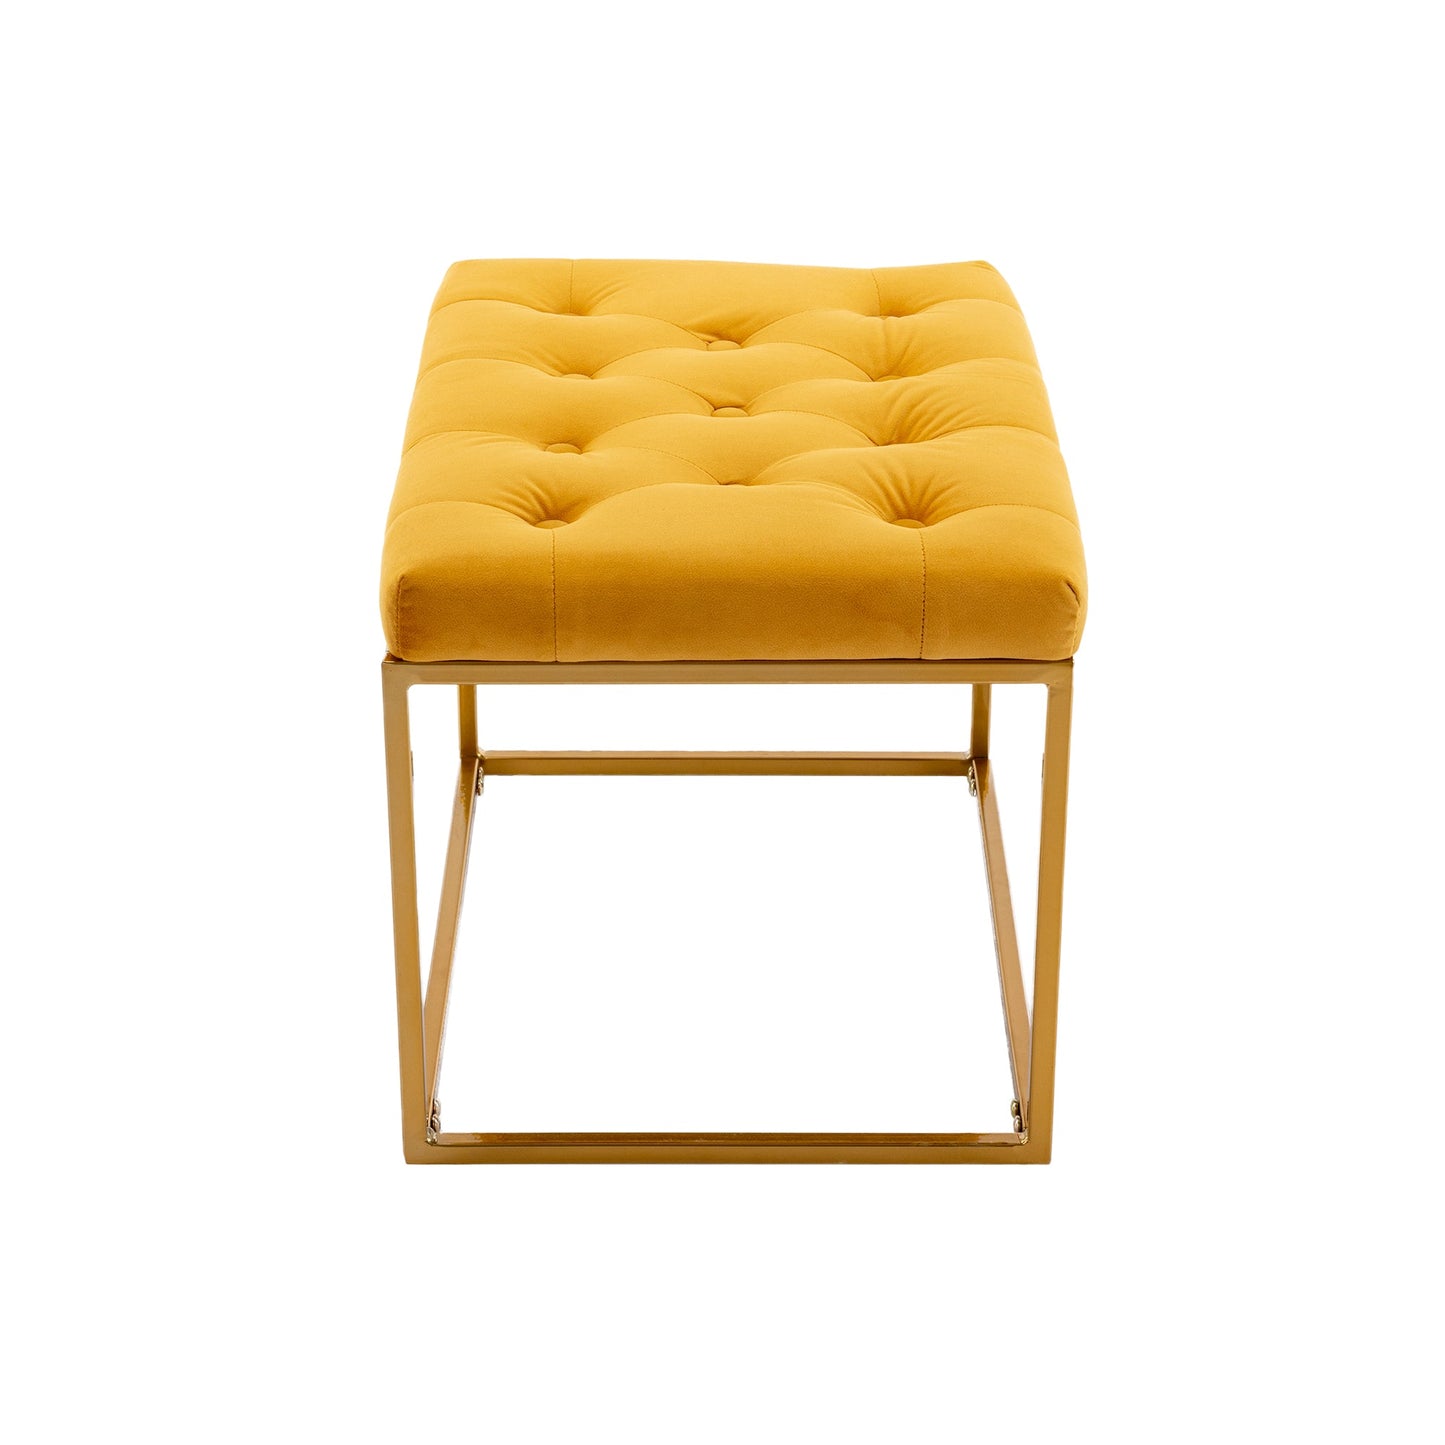 COOLMORE Living Room Tufted Ottoman Yellow - Demine Essentials